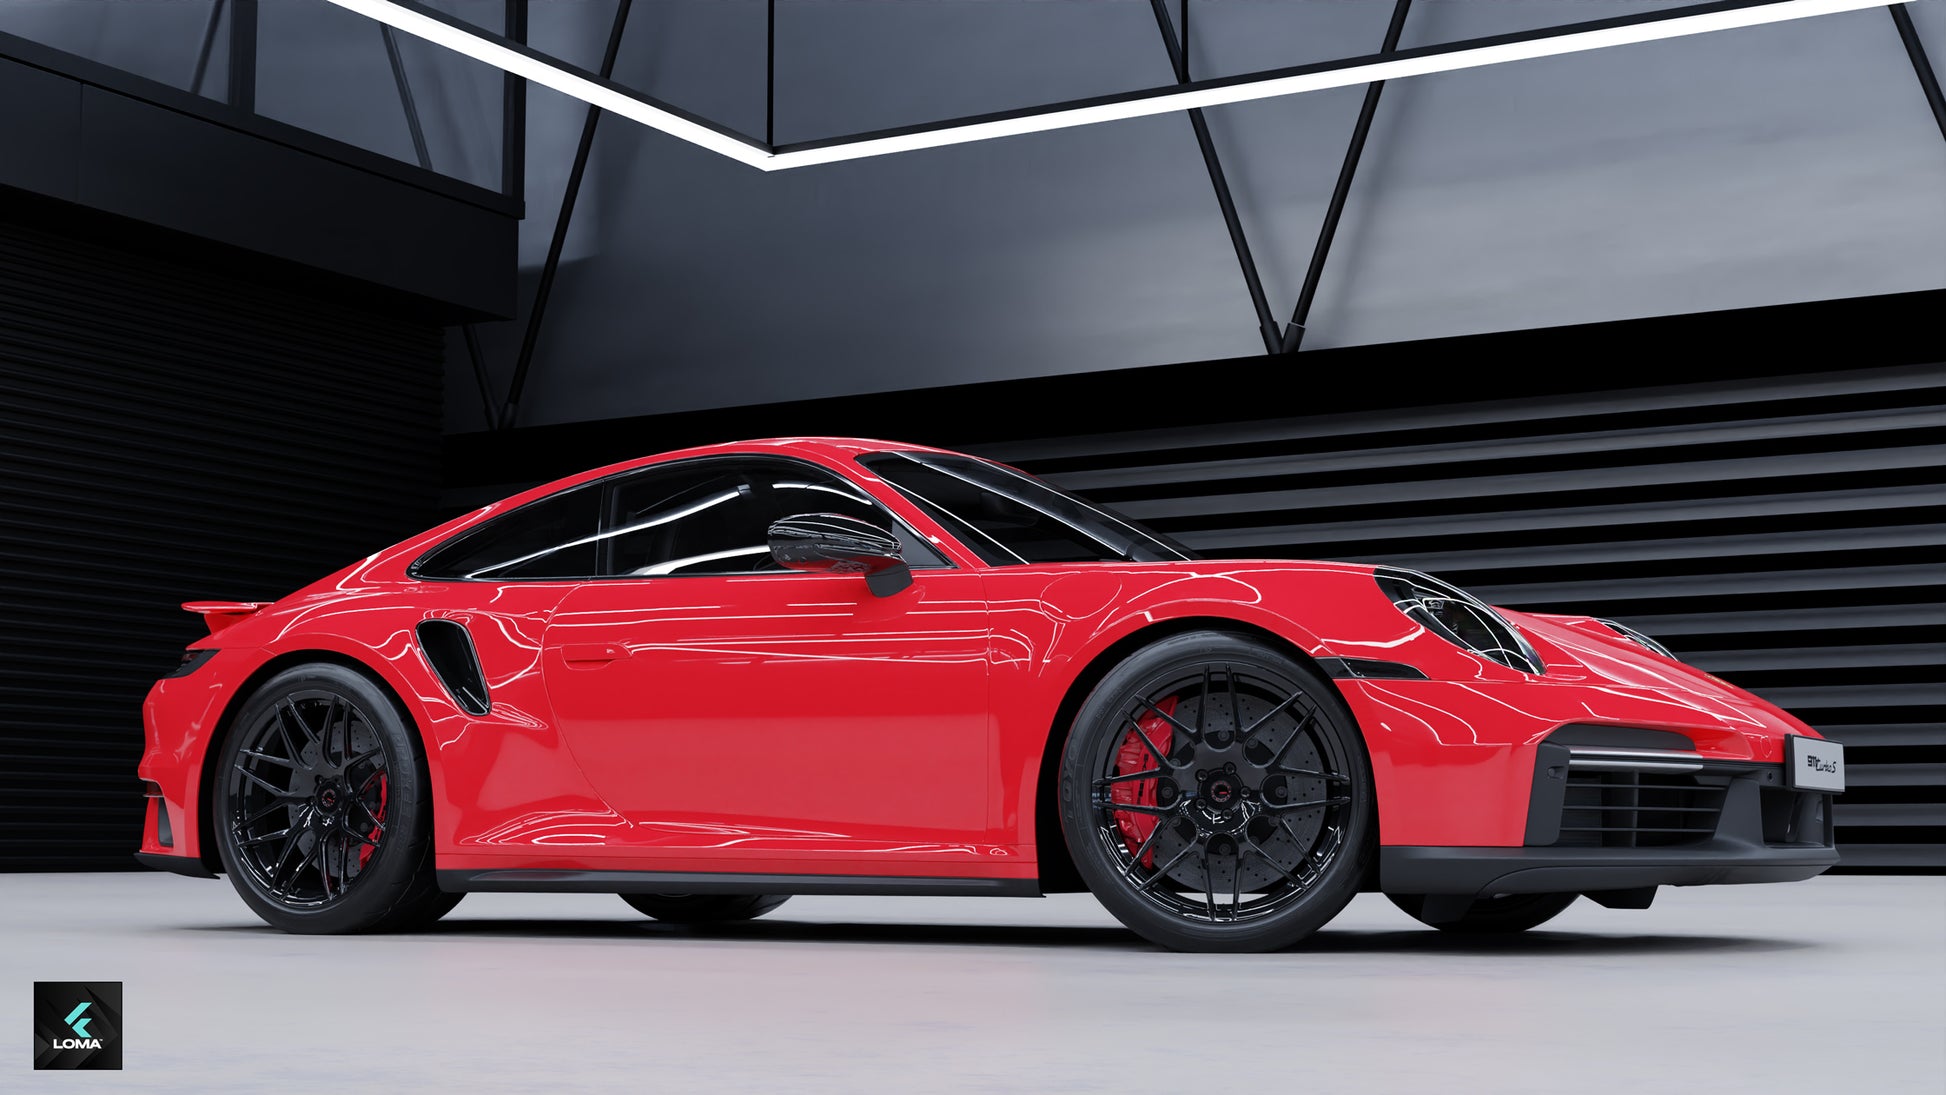 Red Porsche 992 Turbo S on LOMA Forged GTC Aftermarket rims in liquid beluga black